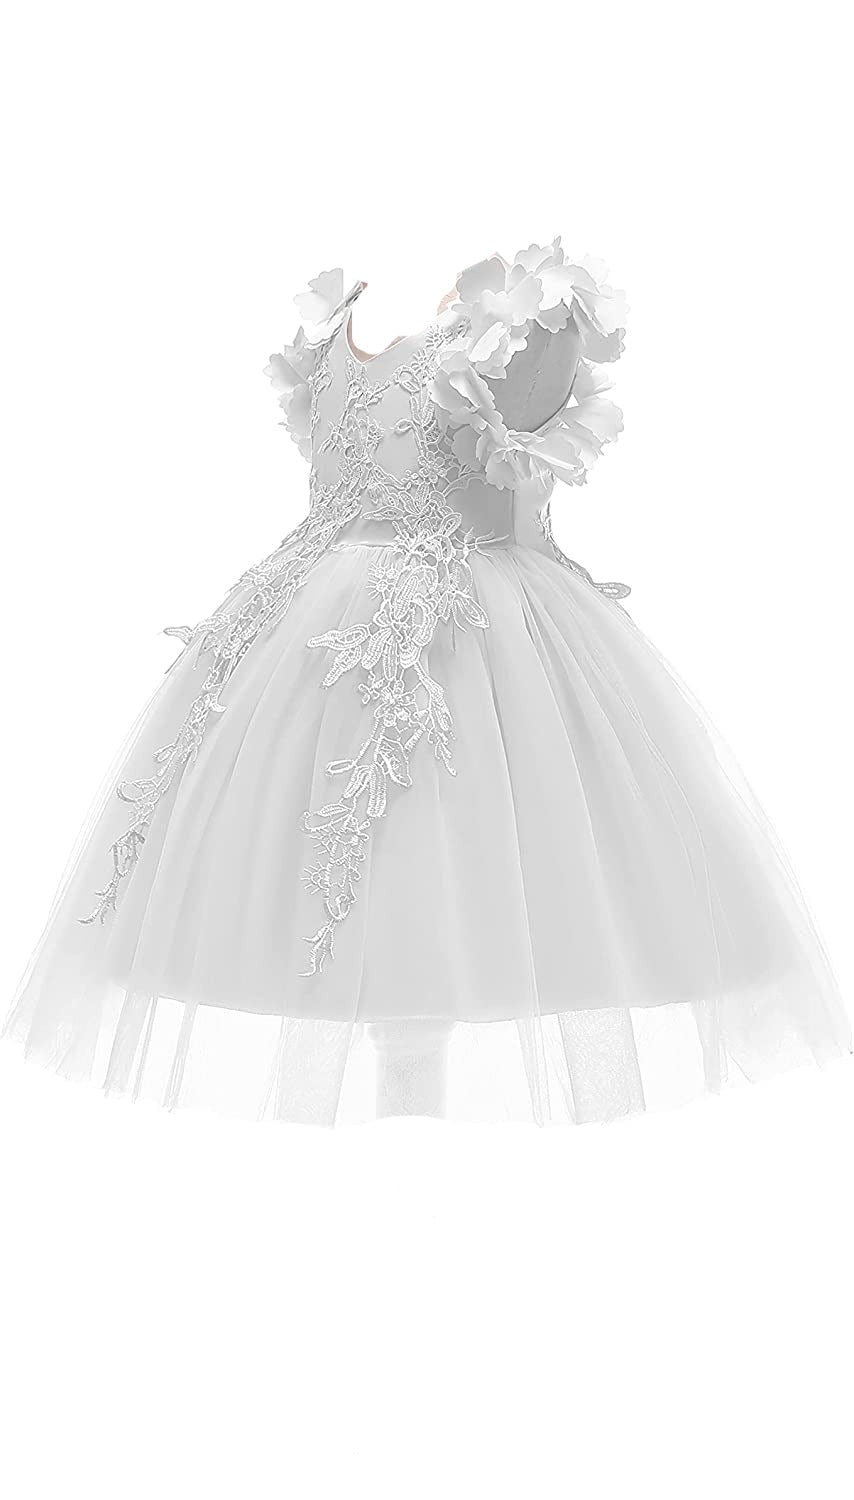 3D Butterfly Cuffs White Lace Tulle A-Line Flower Girl Dress